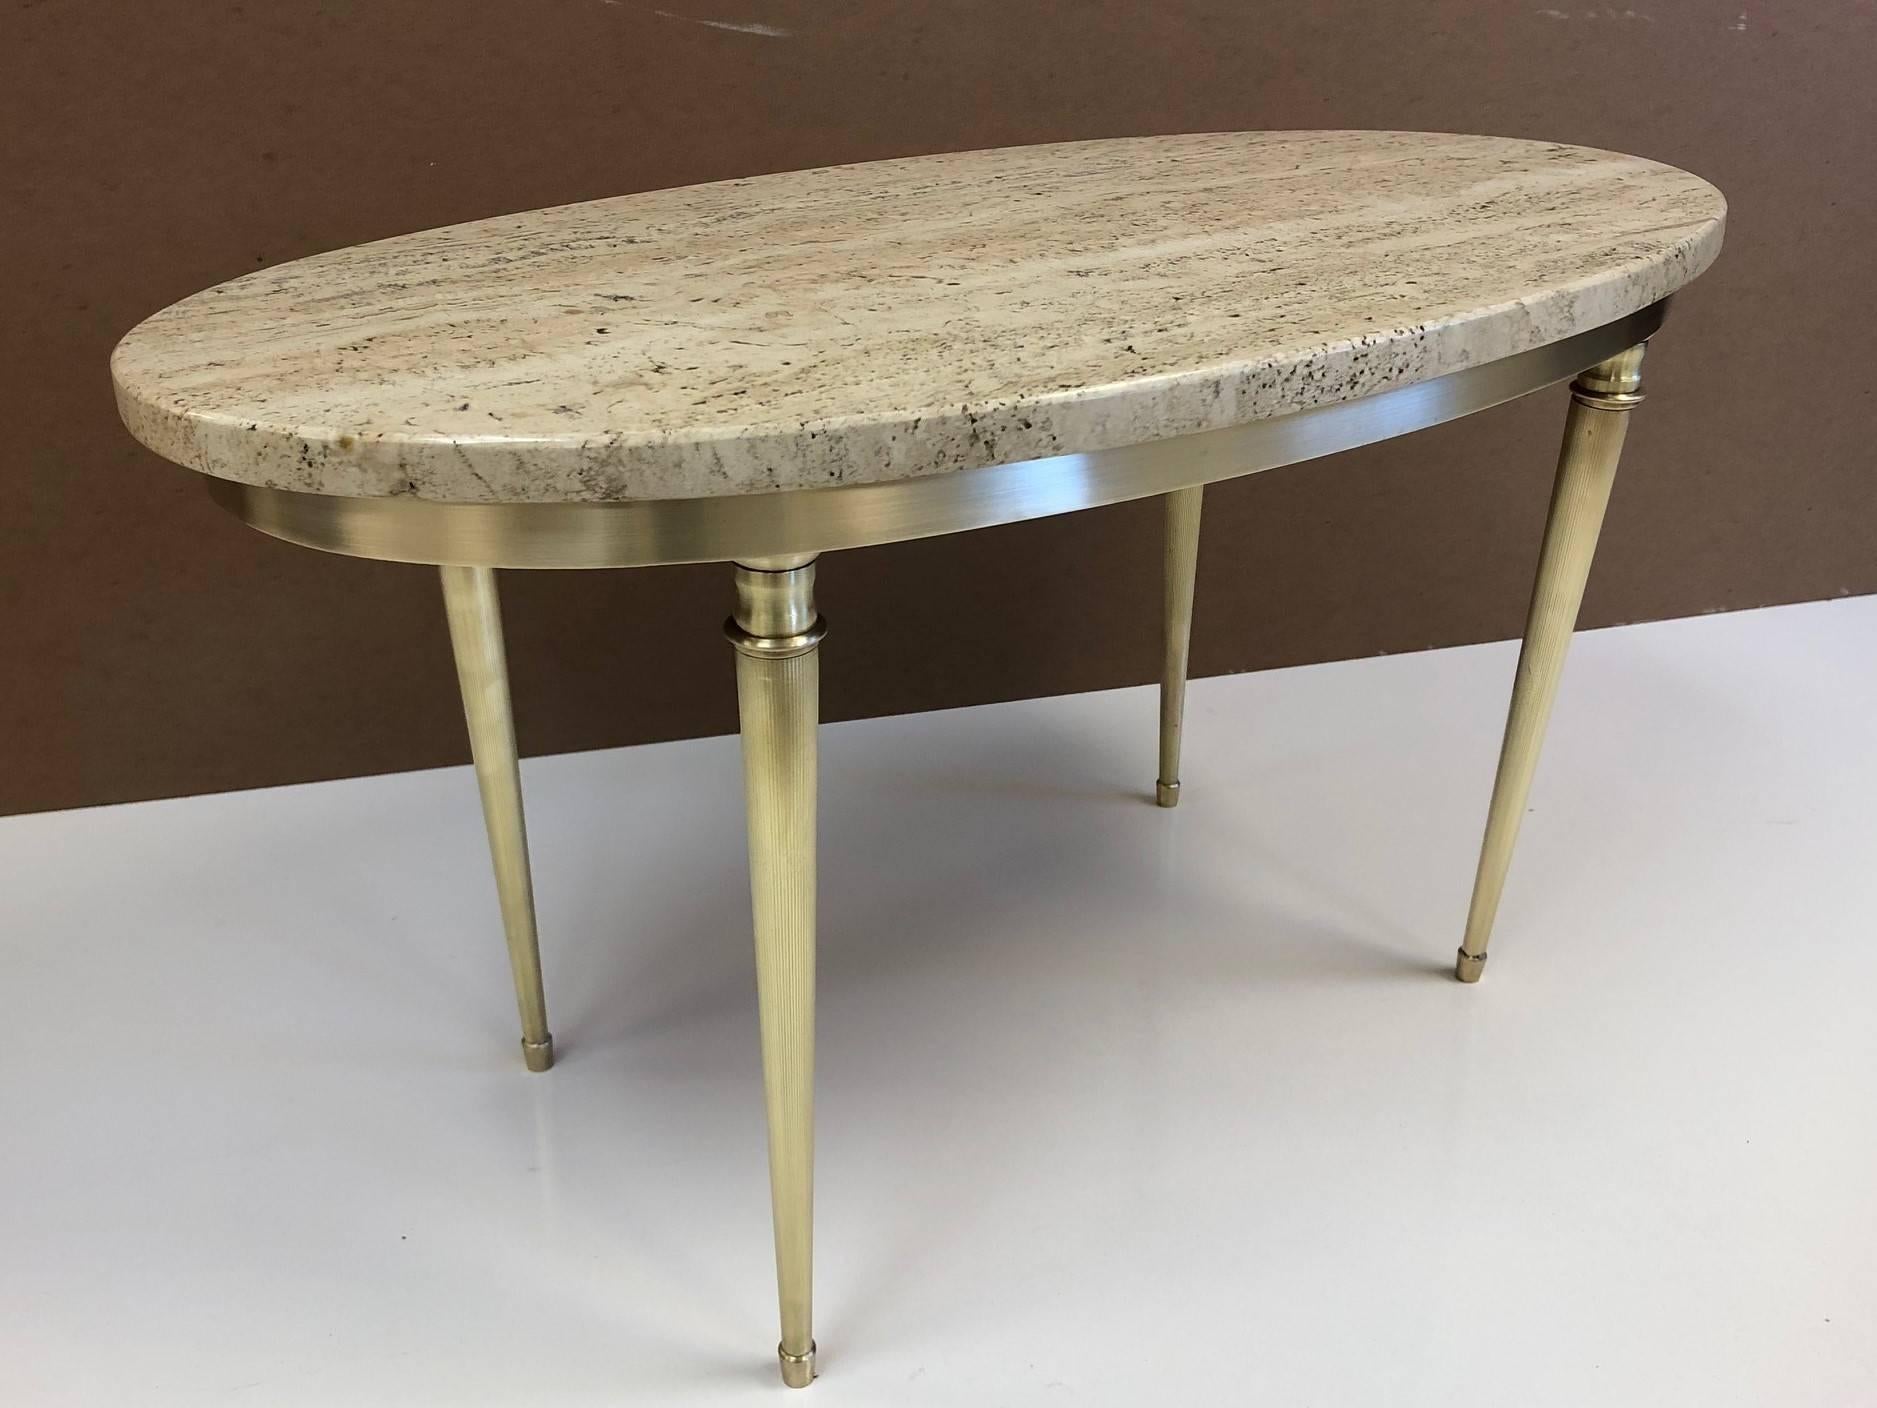 Modernist Italian travertine and brass coffee table. The frame of table is brass with an oval shaped travertine top.